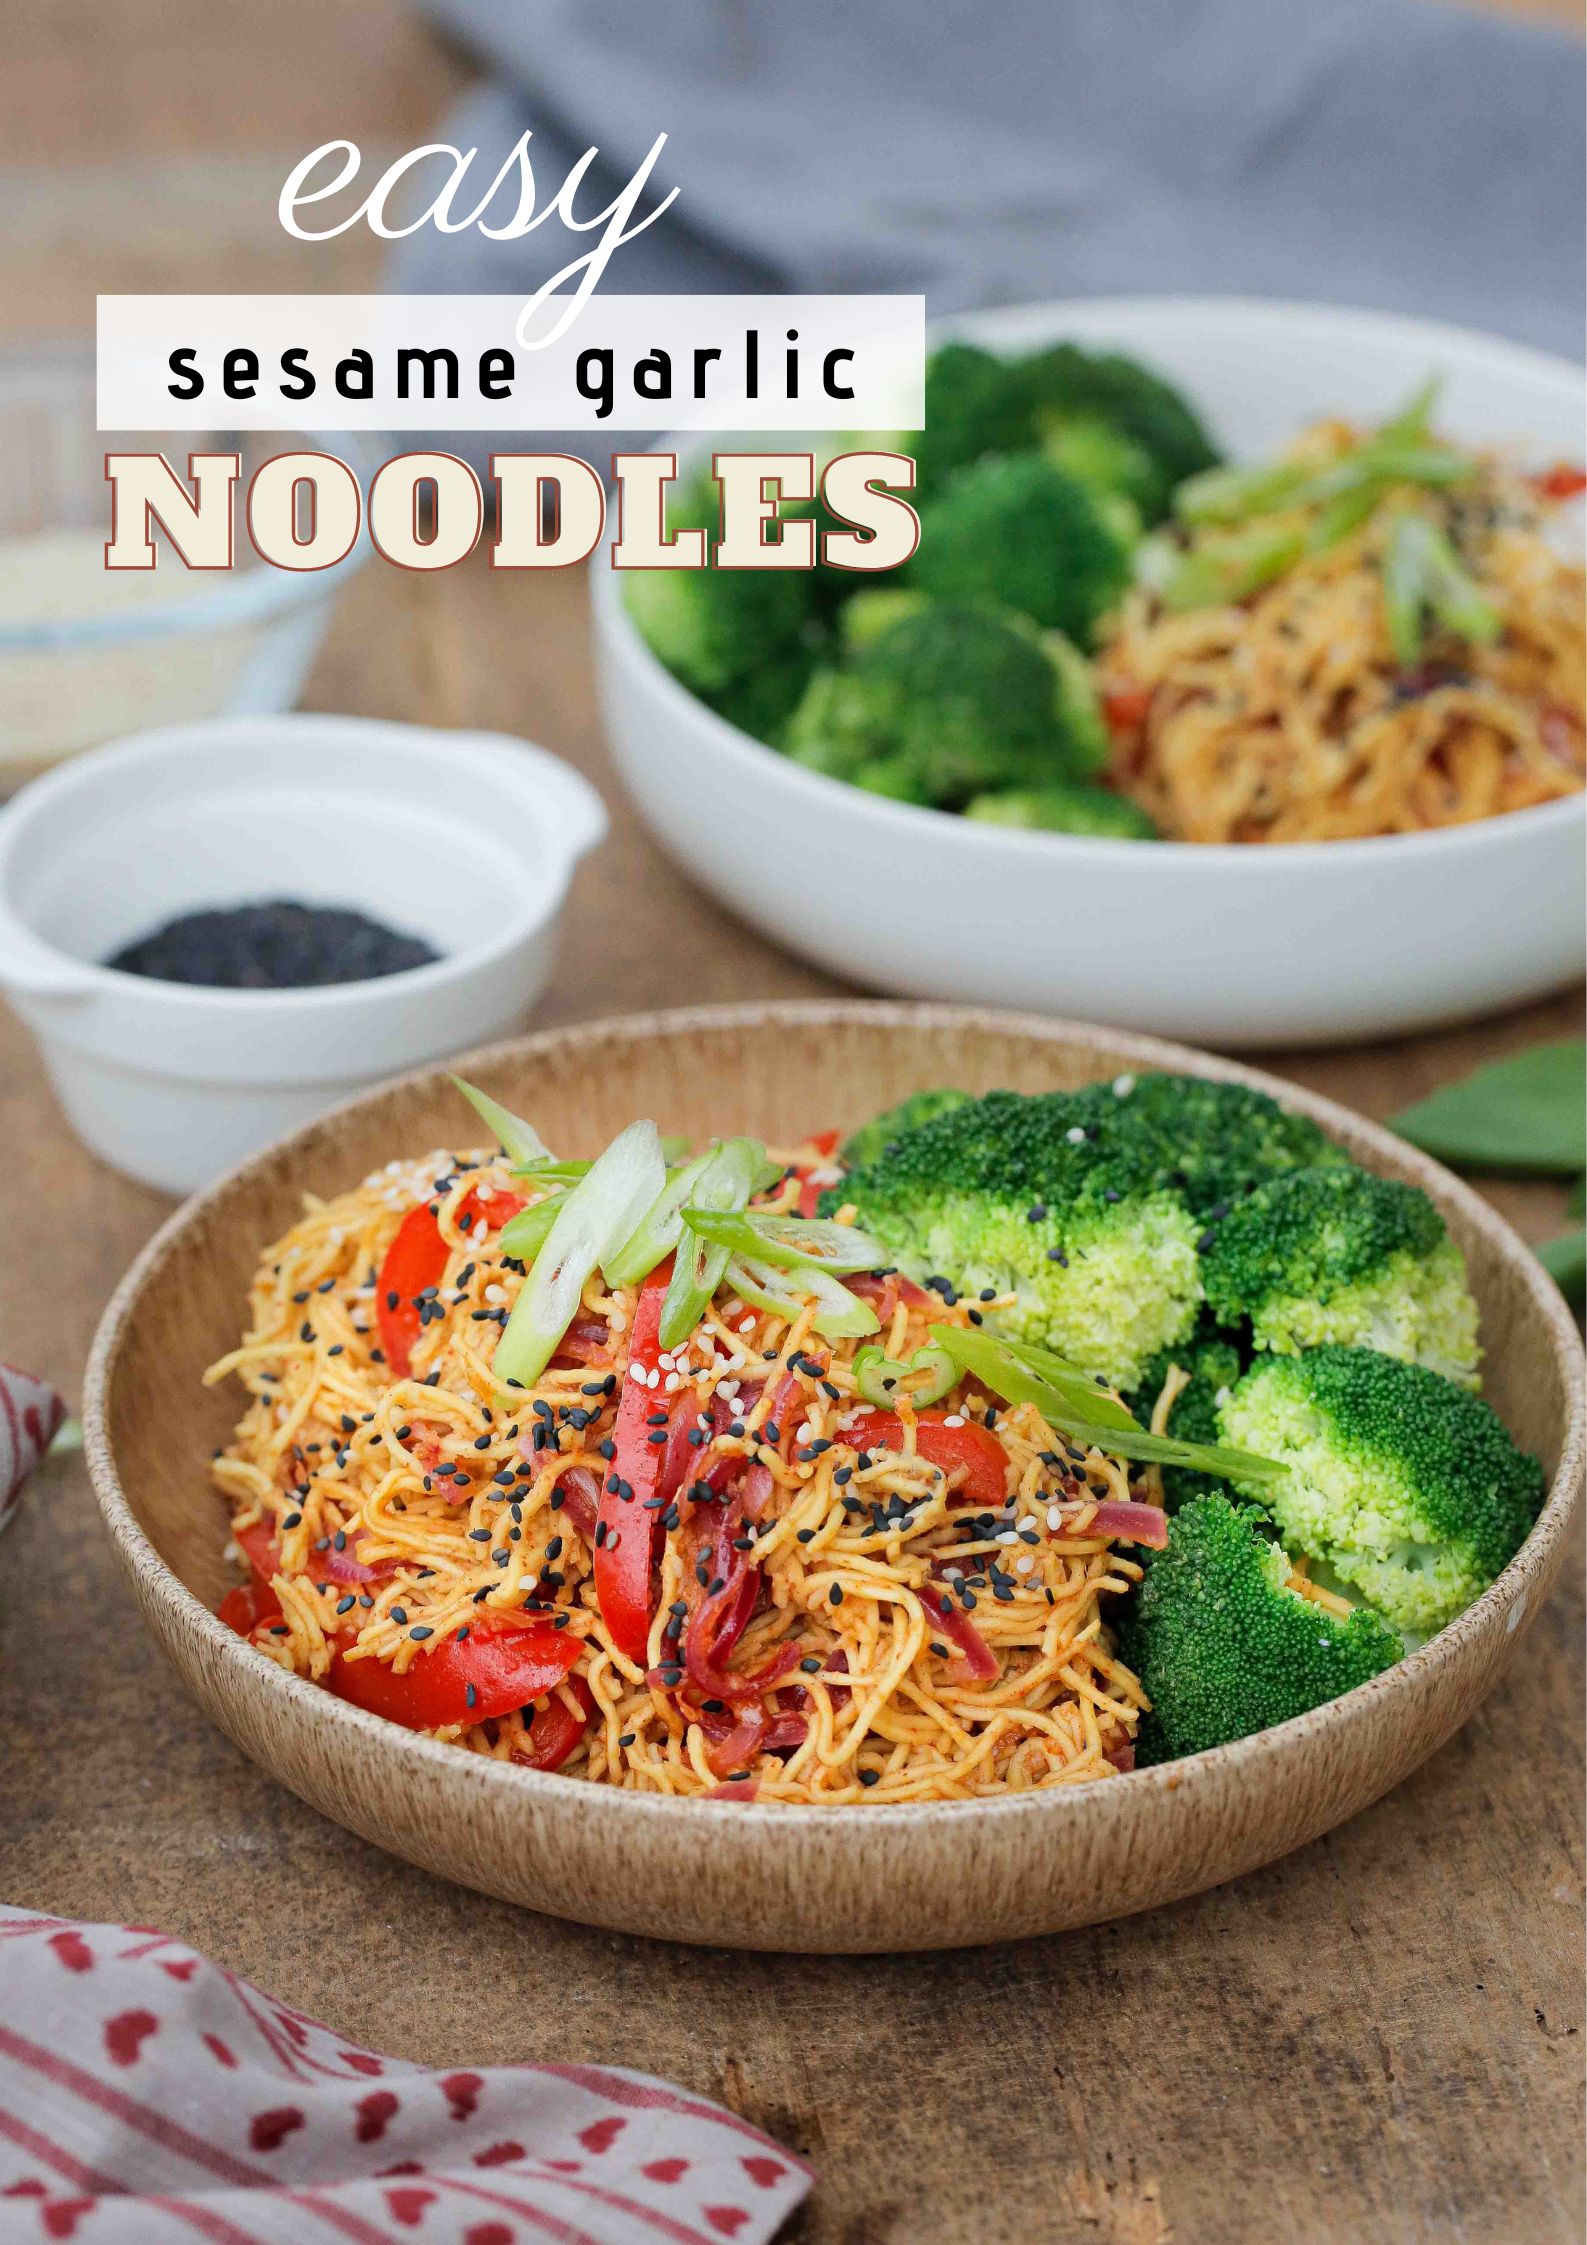 These garlic sesame noodles are healthy, vegan and take just 15 minutes to make! And with just a few store cupboard ingredients they're perfect for busy days | Recipe on thecookandhim.com #noodles #vegan #recipe #sesamegarlicnoodles #sesamenoodles #chowmein #stirfry #easydinner #easymeal #easymealideas